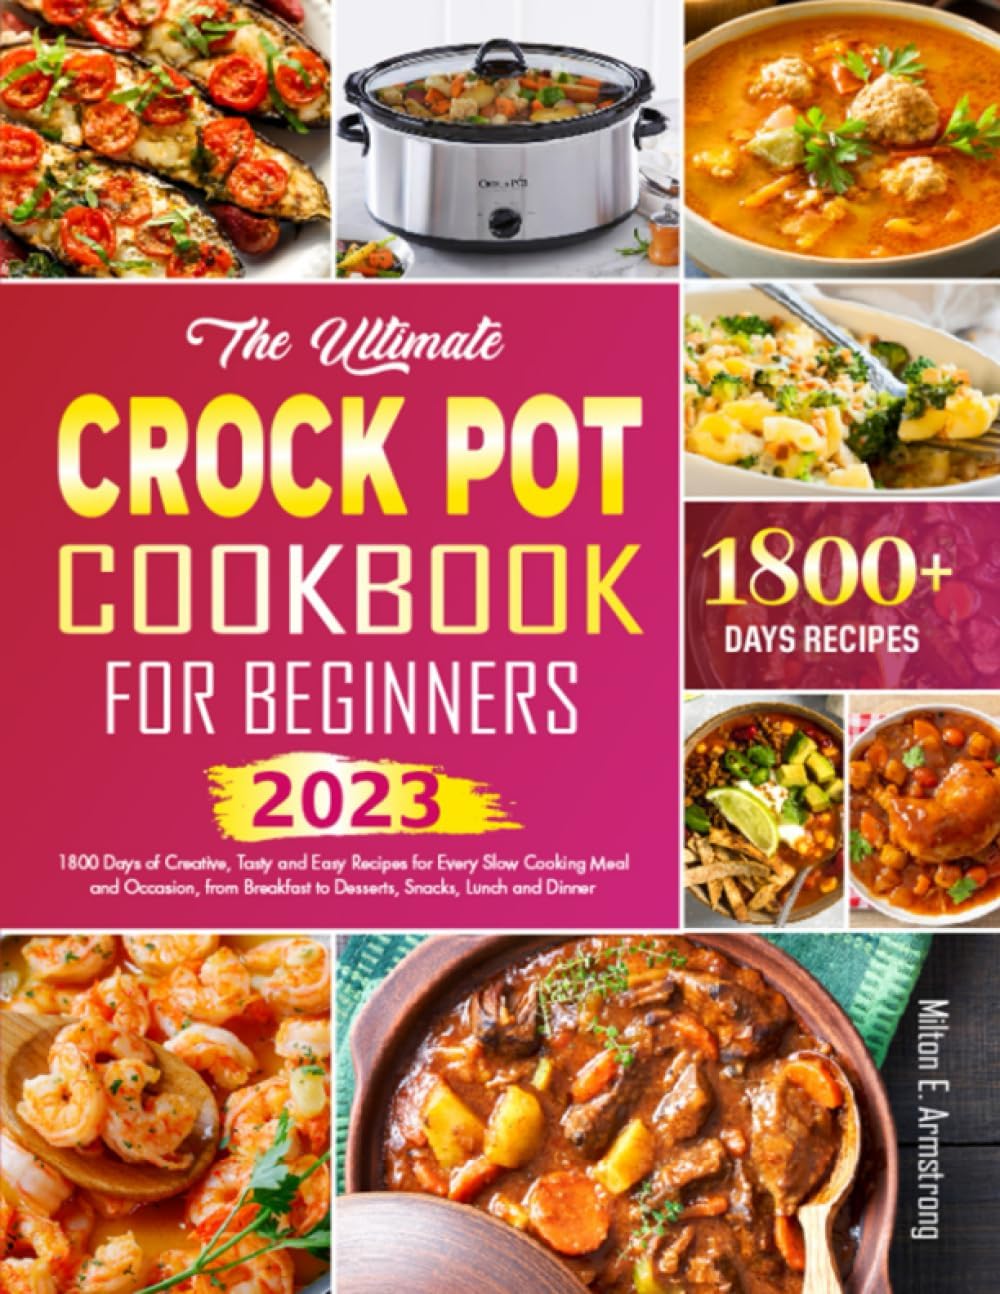 The Ultimate Crock Pot Cookbook for Beginners: 1800 Days of Creative, Tasty and Easy Recipes for Every Slow Cooking Meal and Occasion, from Breakfast to Desserts, Snacks, Lunch and Dinner